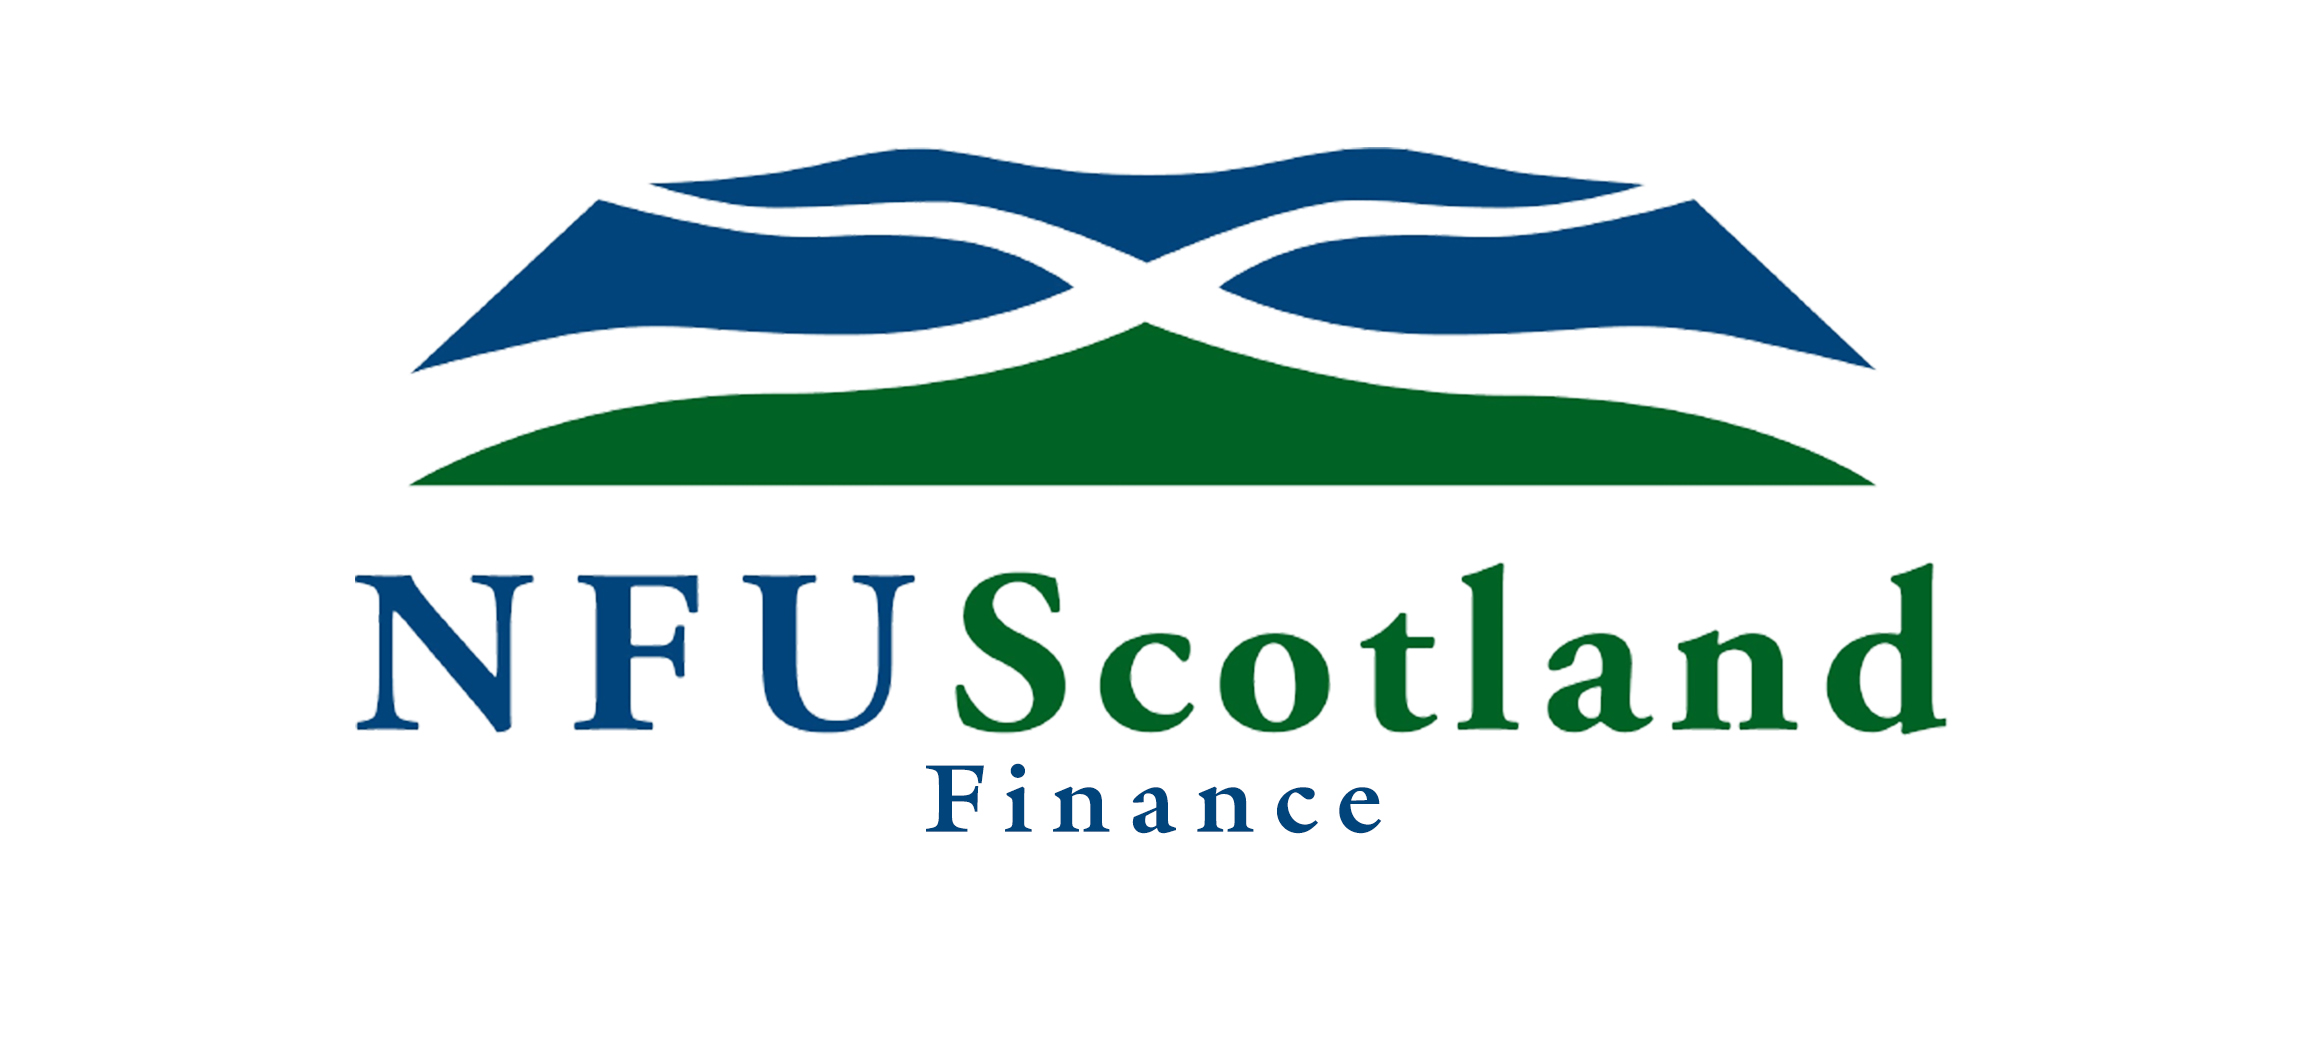 NFU SCOTLAND FINANCE LAUNCHED AS DEDICATED FINANCIAL SERVICE FOR MEMBERS